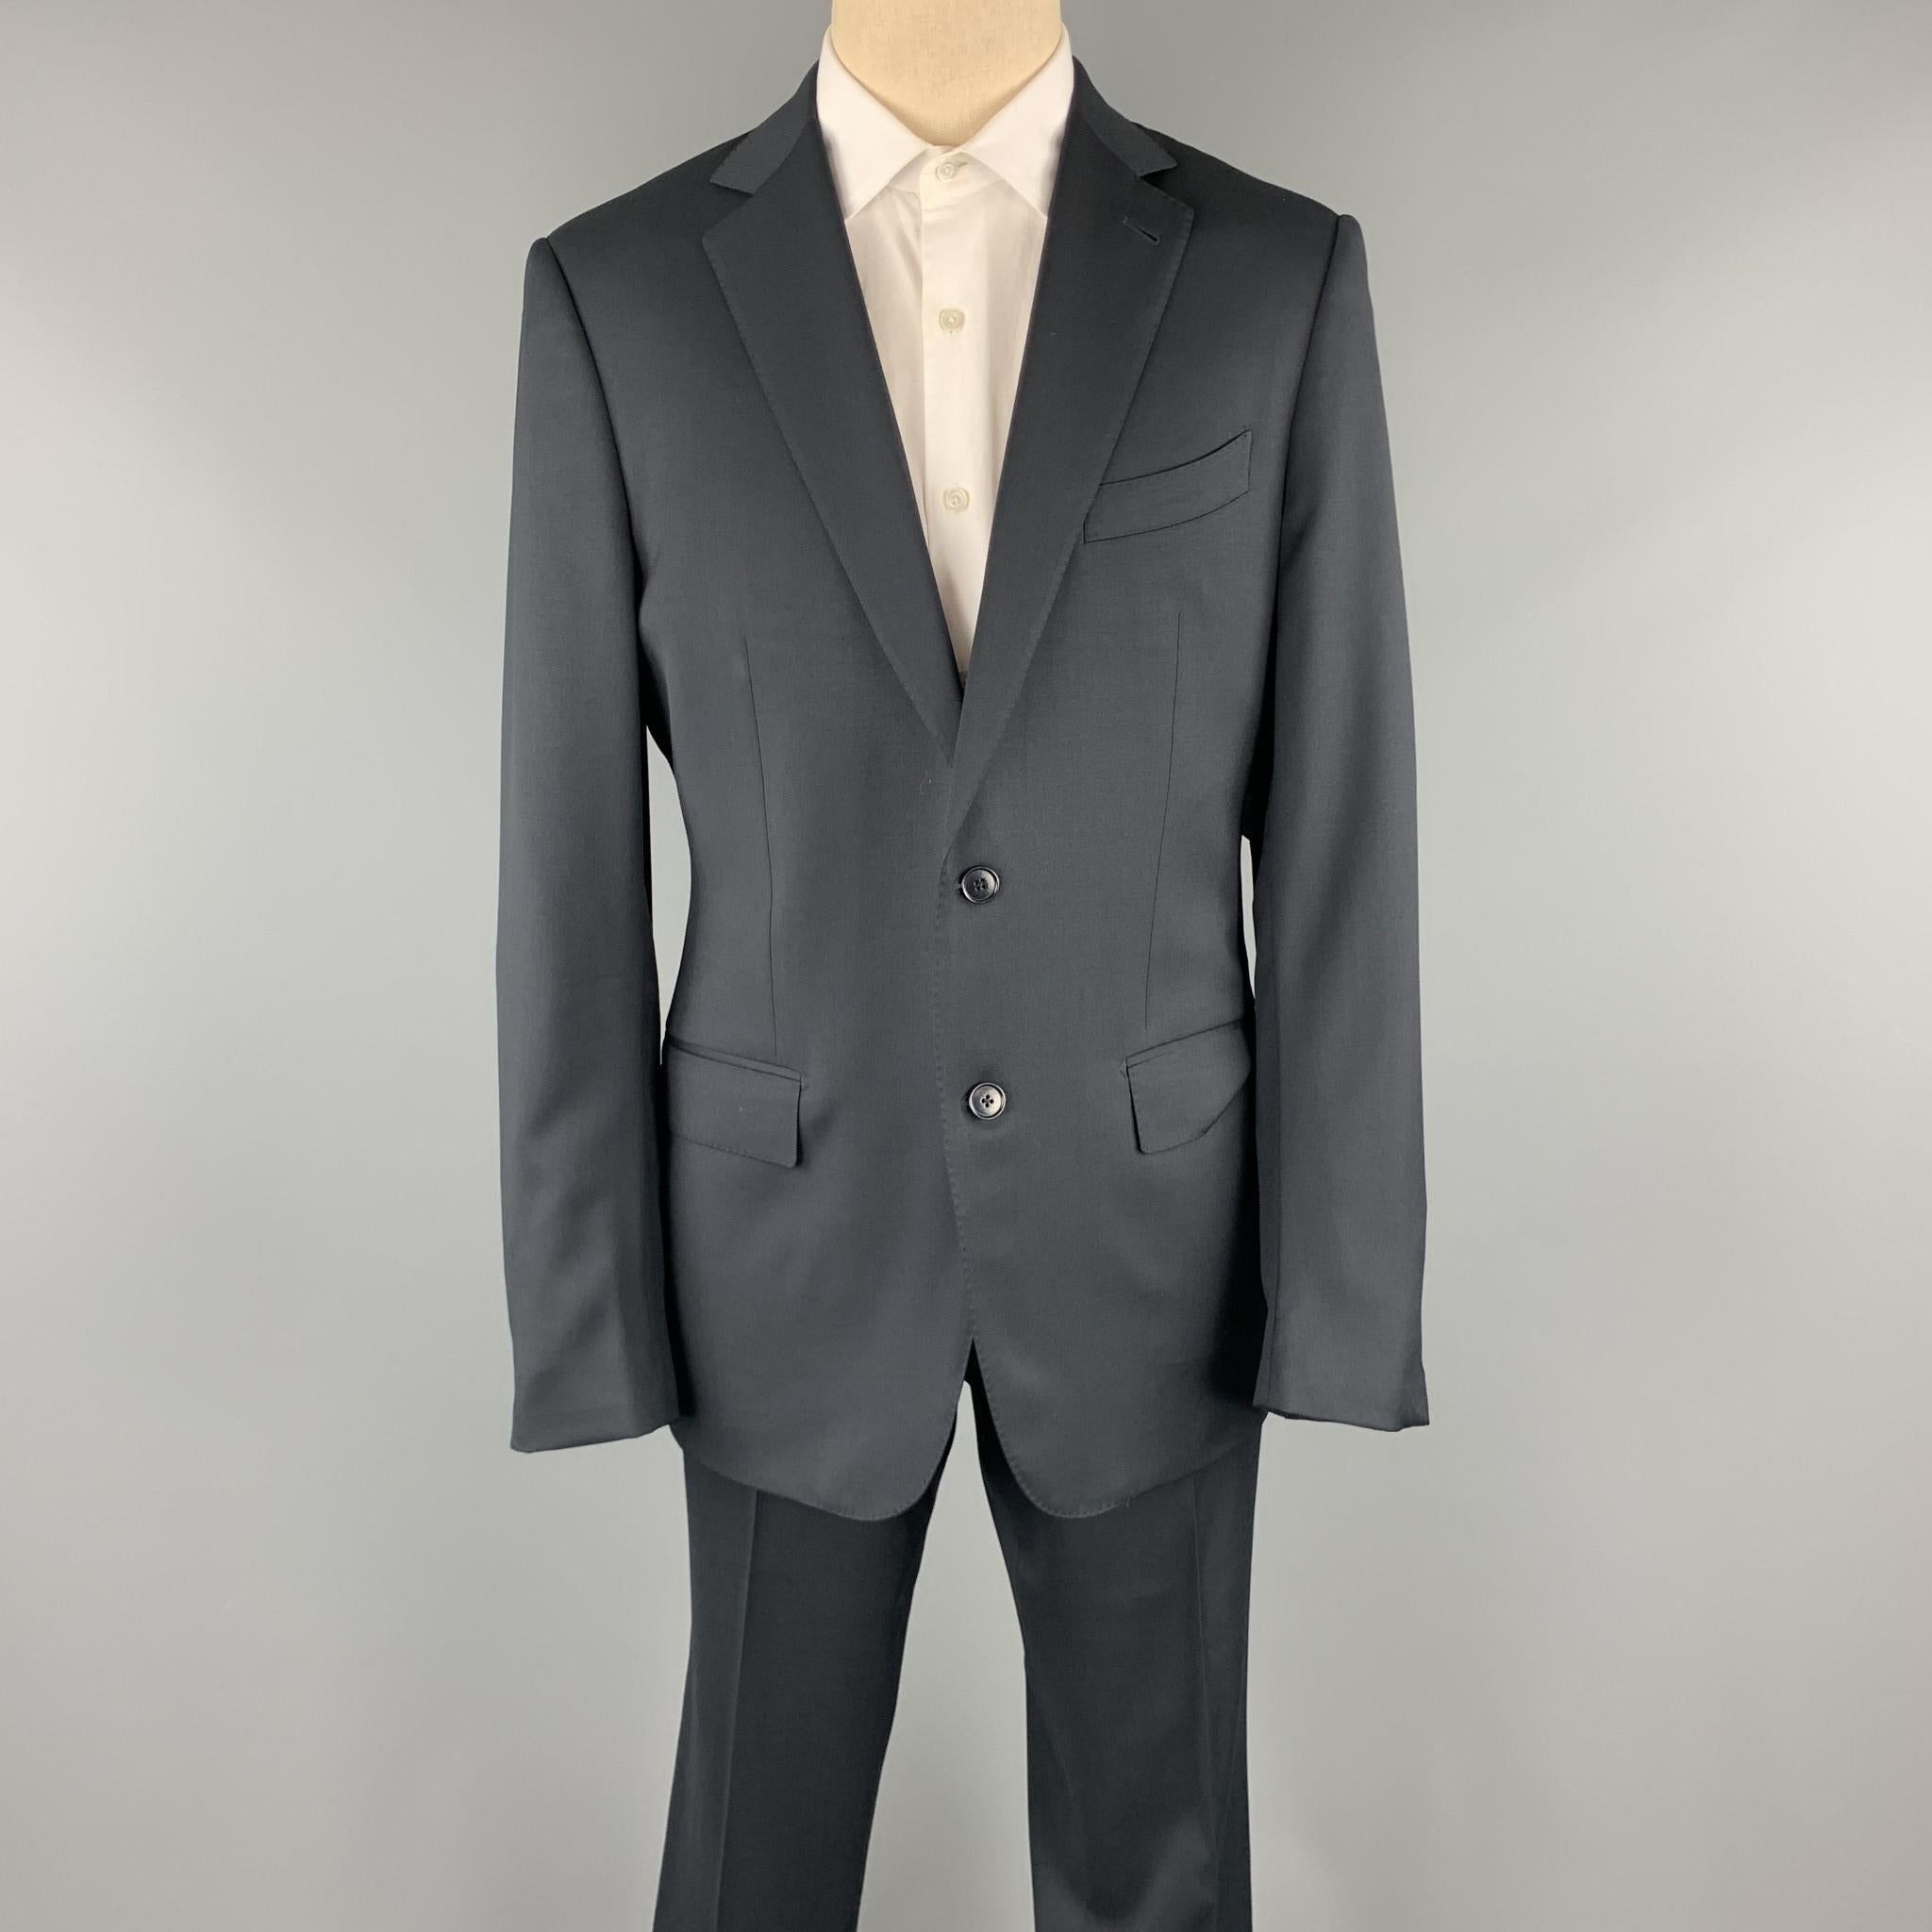 ERMENEGILDO ZEGNA suit comes in a black wool with a full liner and includes a single breasted, two button sport coat with a notch lapel and matching pleated front trousers. 

Excellent Pre-Owned Condition.
Marked: 52 R
Original Retail Price: